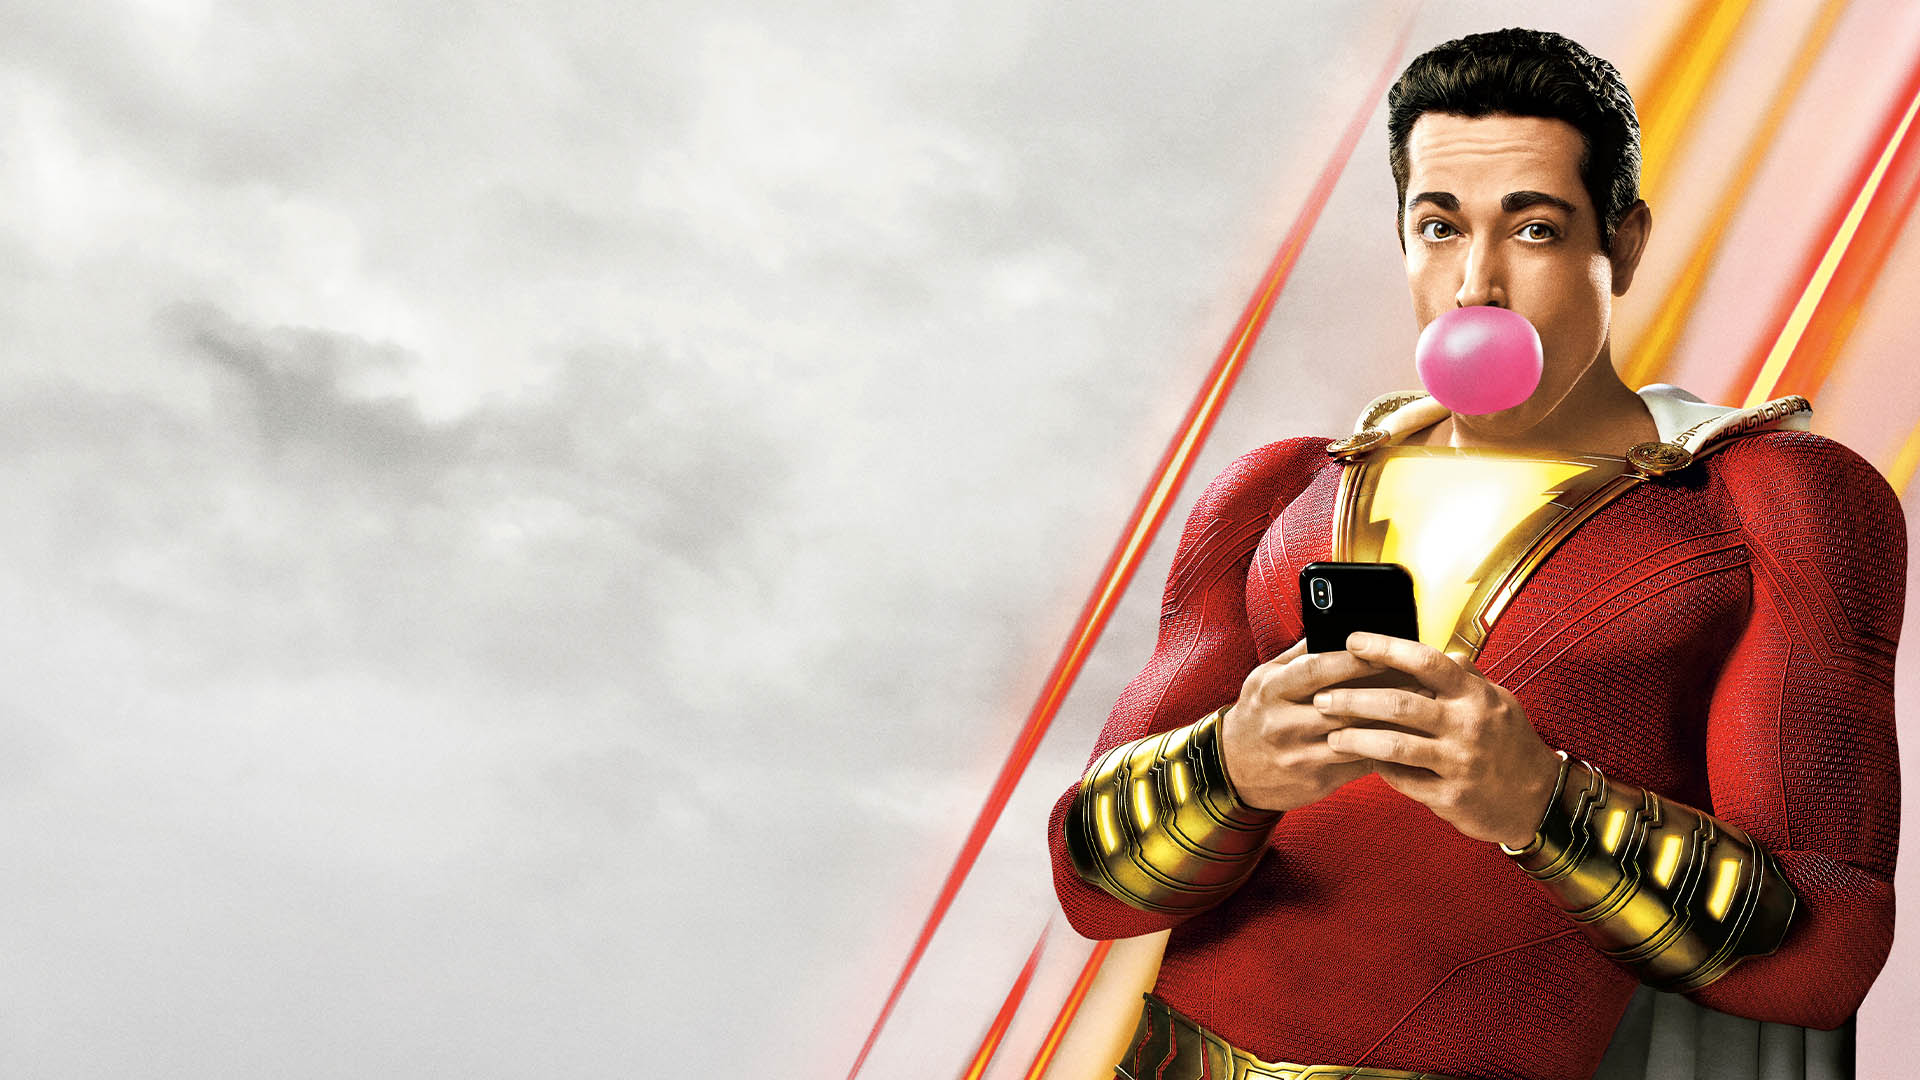 The main character of the movie! Shazam is working with the phone and chewing gum